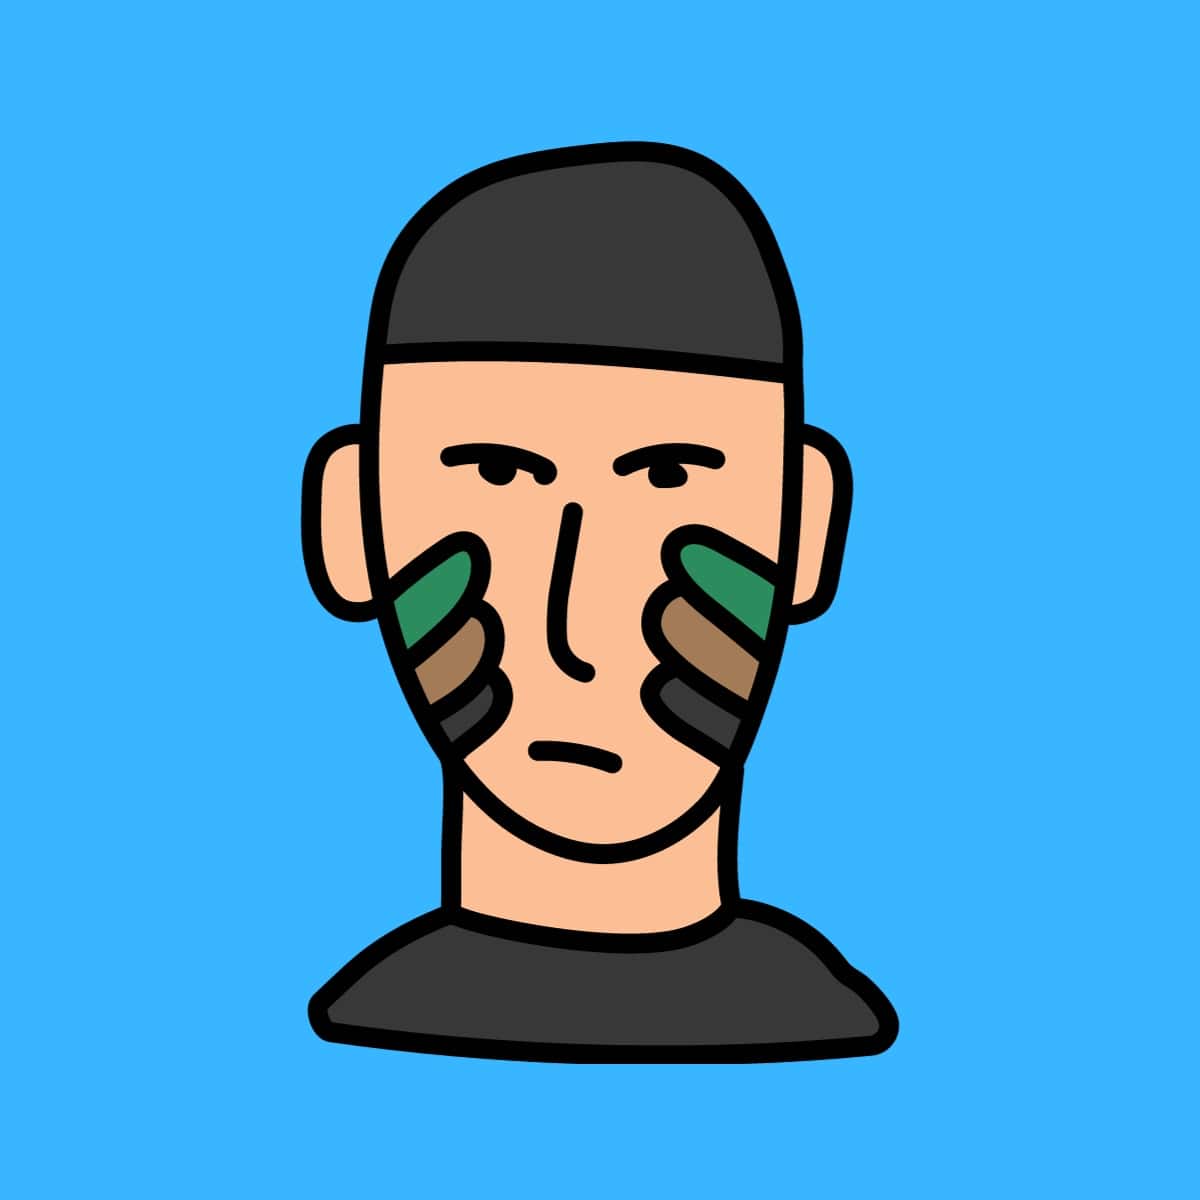 Cartoon graphic of a man with a camo painted face on a blue background.